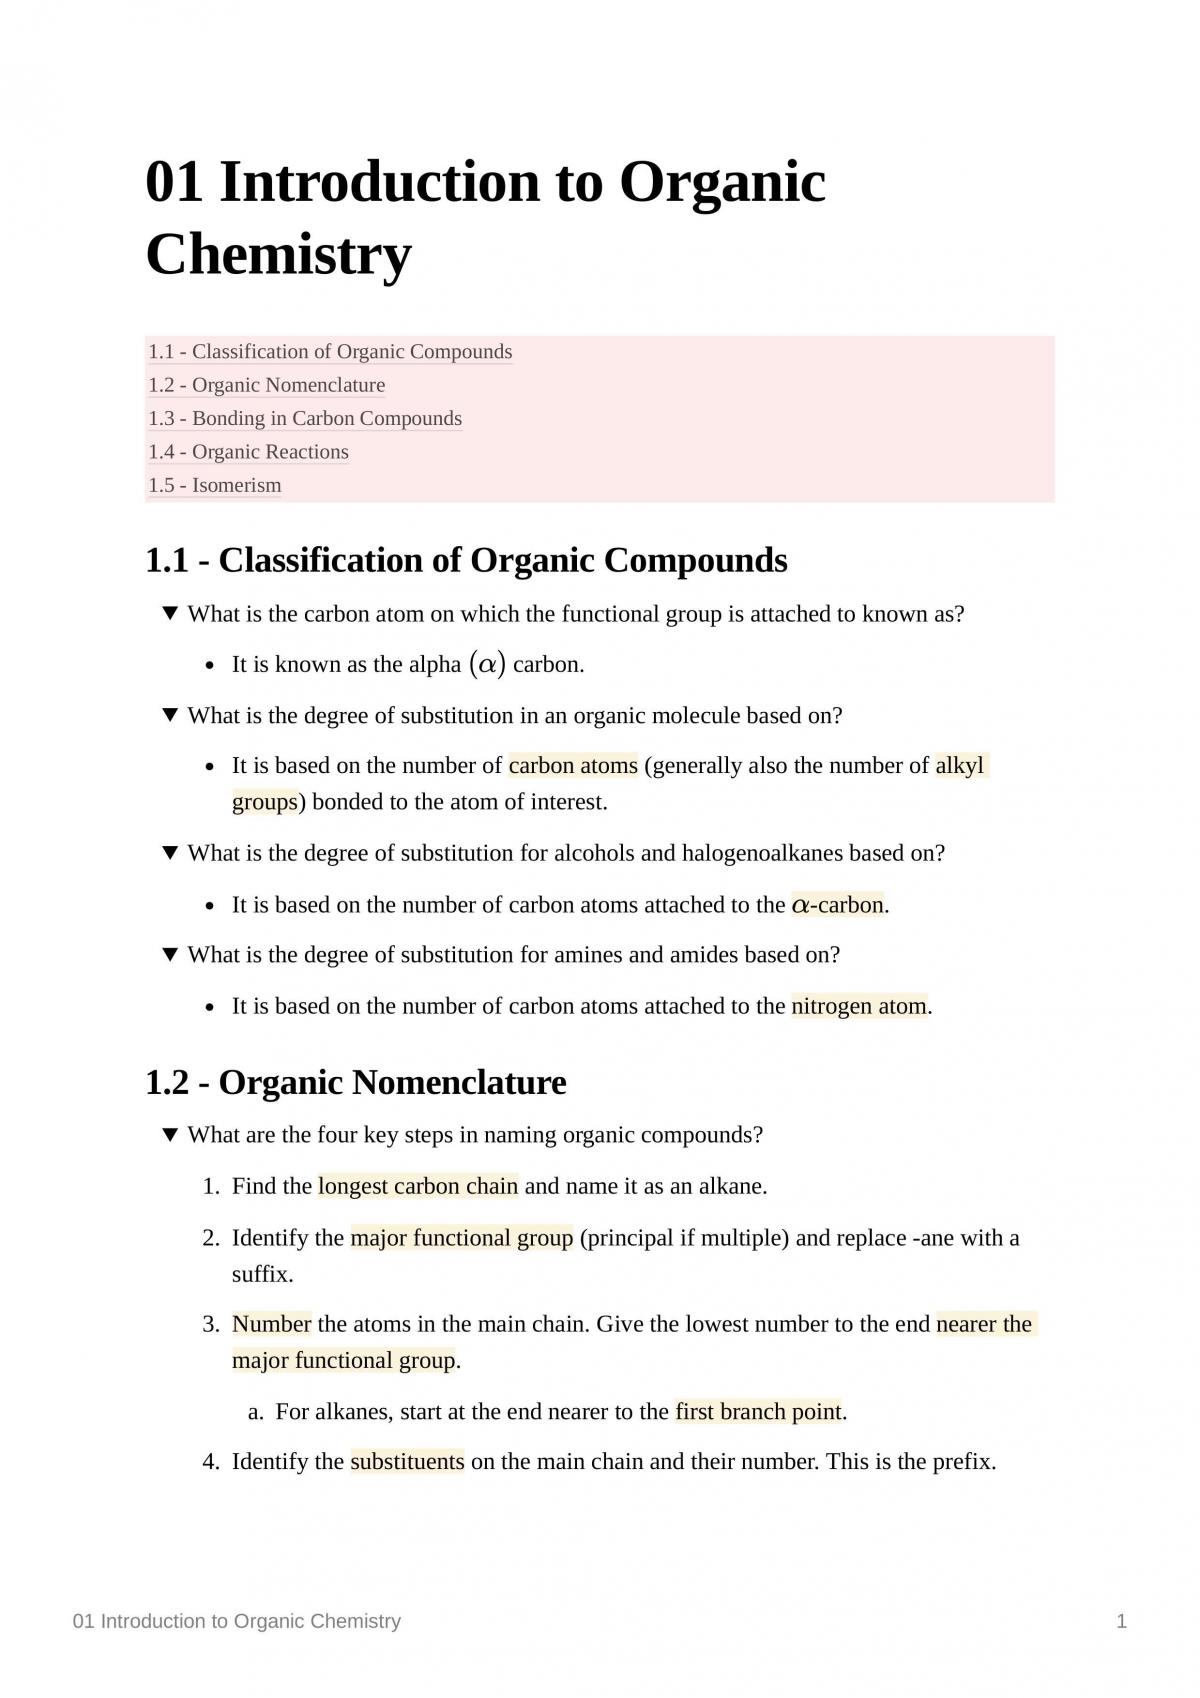 Complete H2 Chemistry Guide (Organic Chemistry) - Page 1